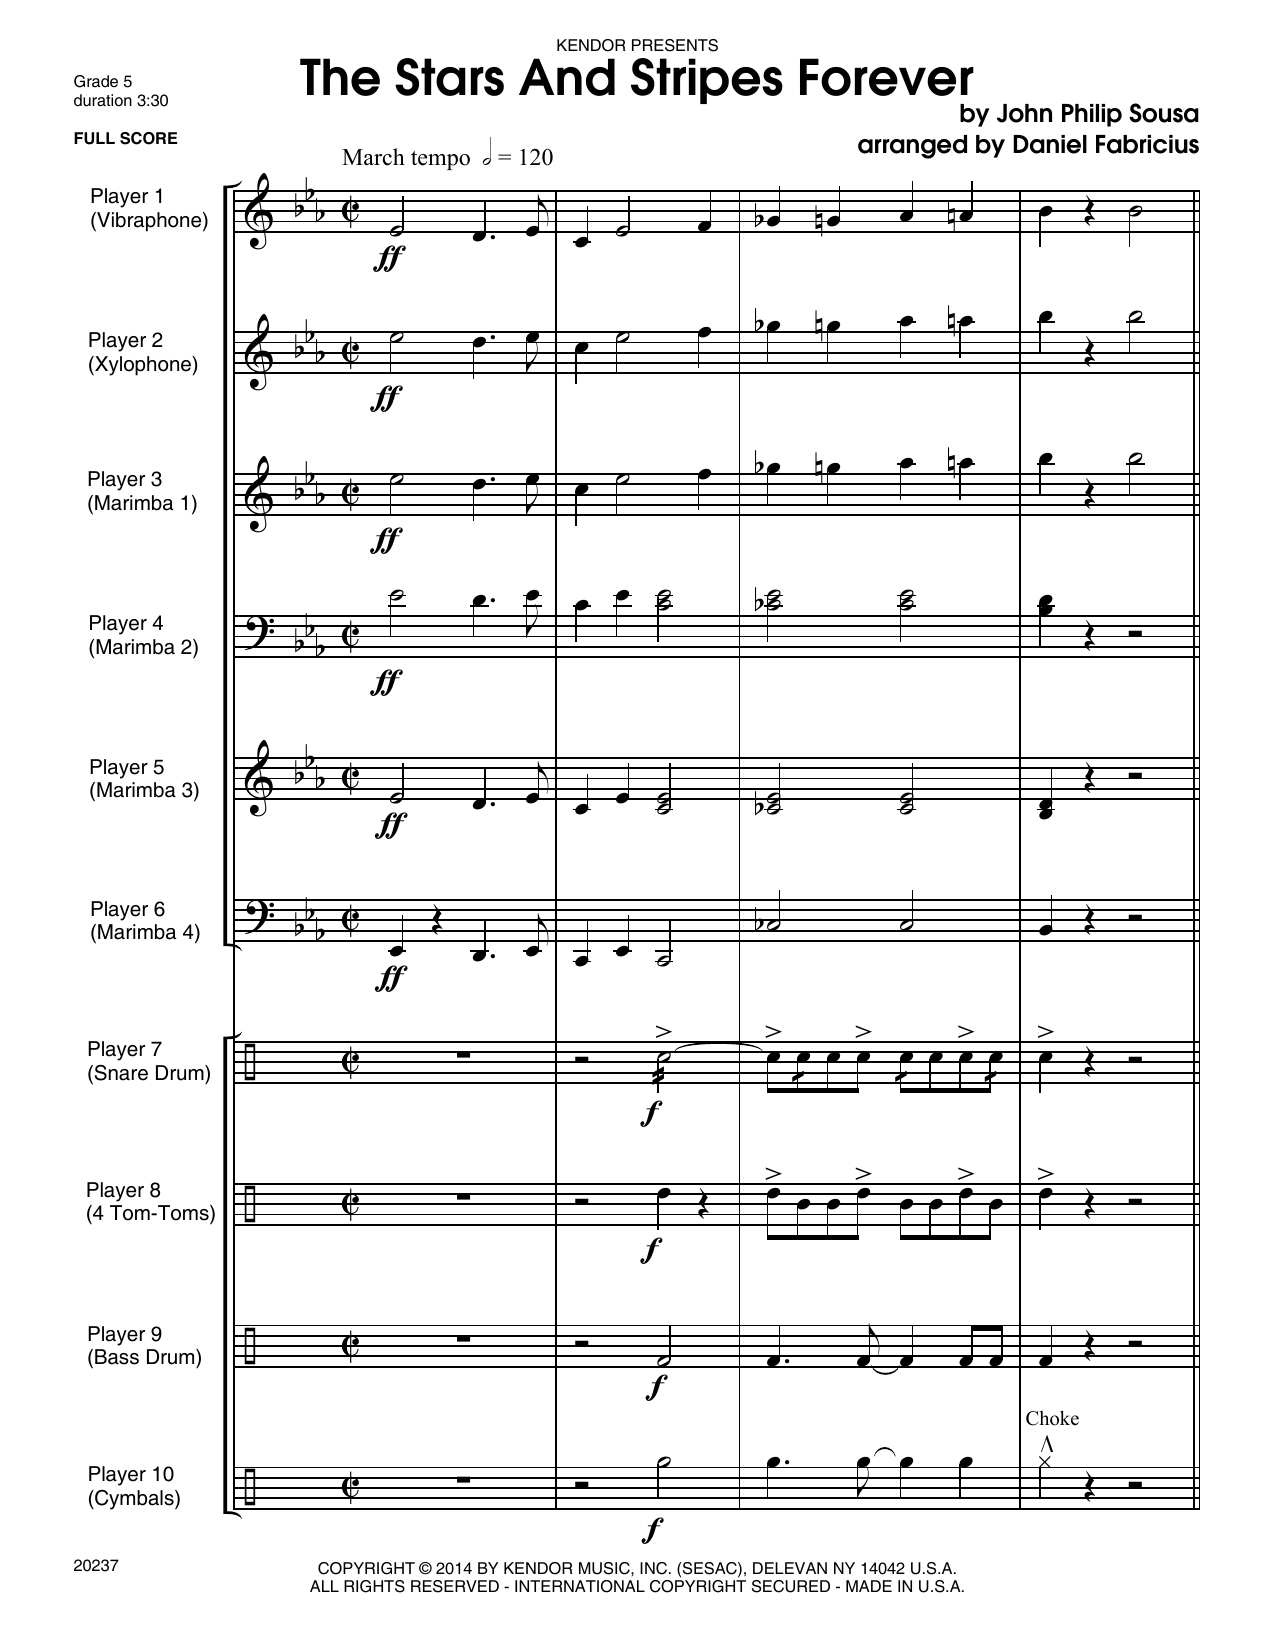 Daniel Fabricious The Stars And Stripes Forever - Full Score sheet music notes and chords. Download Printable PDF.